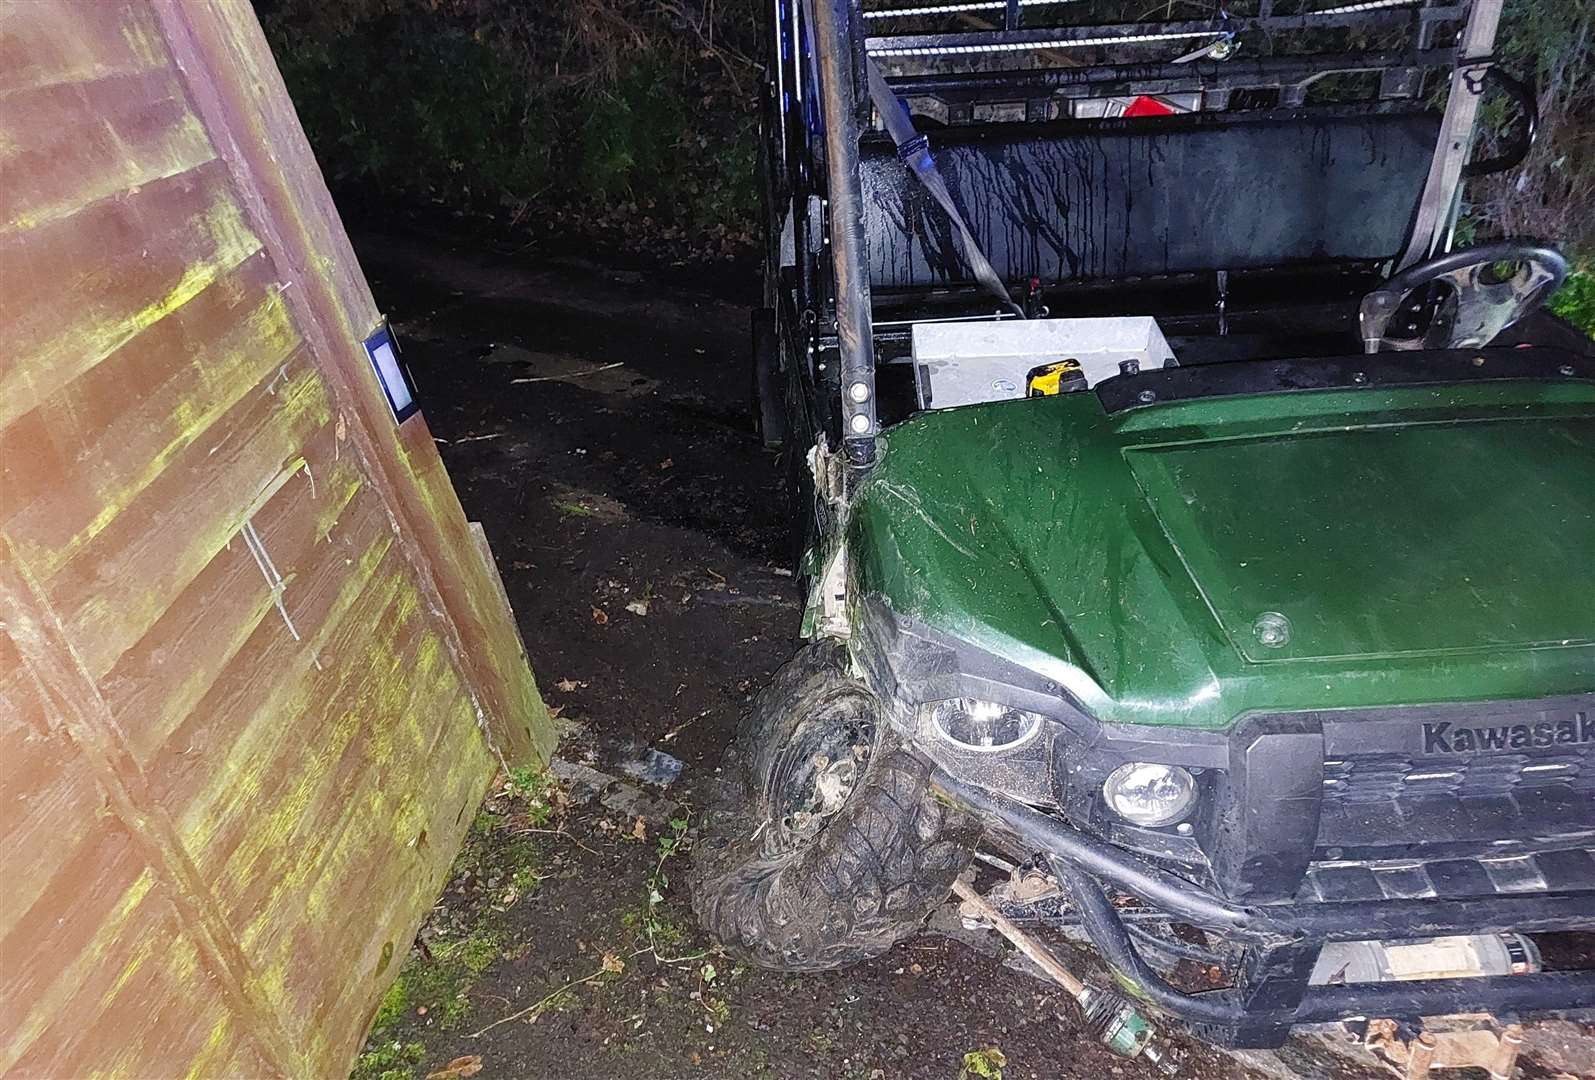 Police arrested a man on suspicion of drink driving after a green buggy crashed into a fence in Halstead. Picture: Kent Police